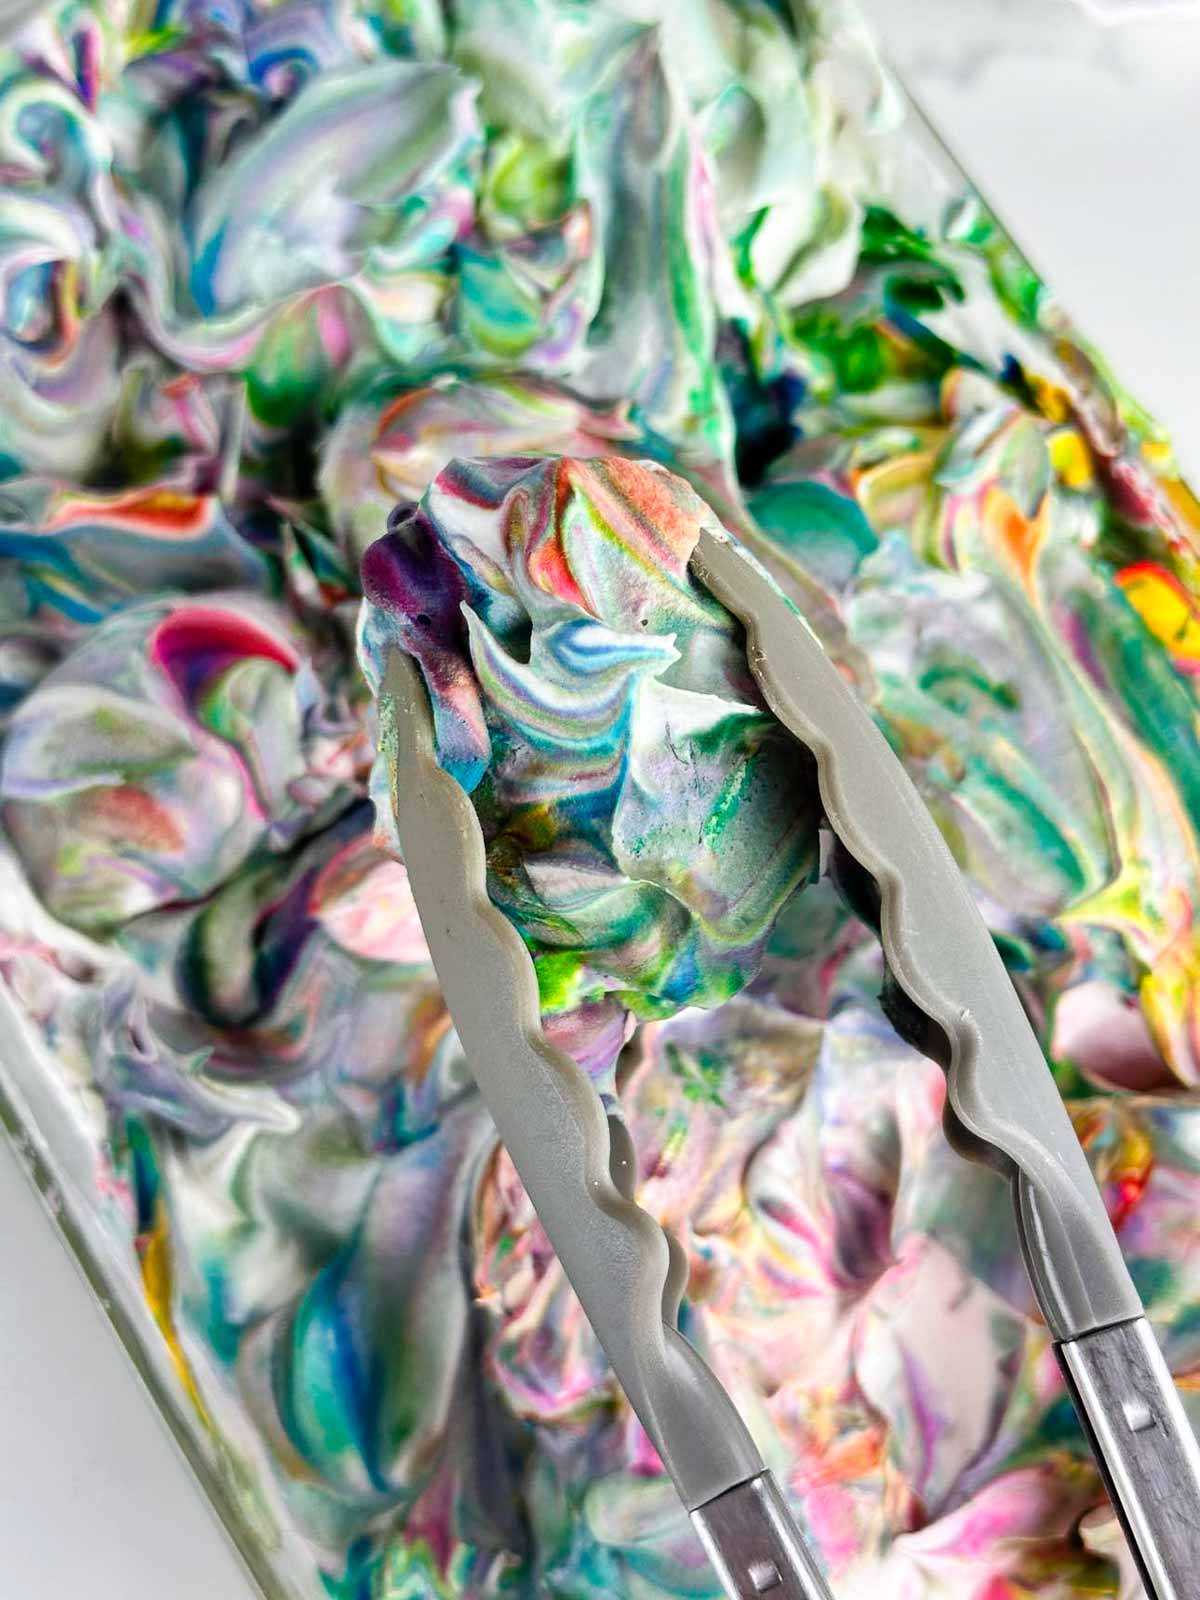 After the eggs have sat in the color swirled Cool Whip, use a pair of tongs to remove them one by one.